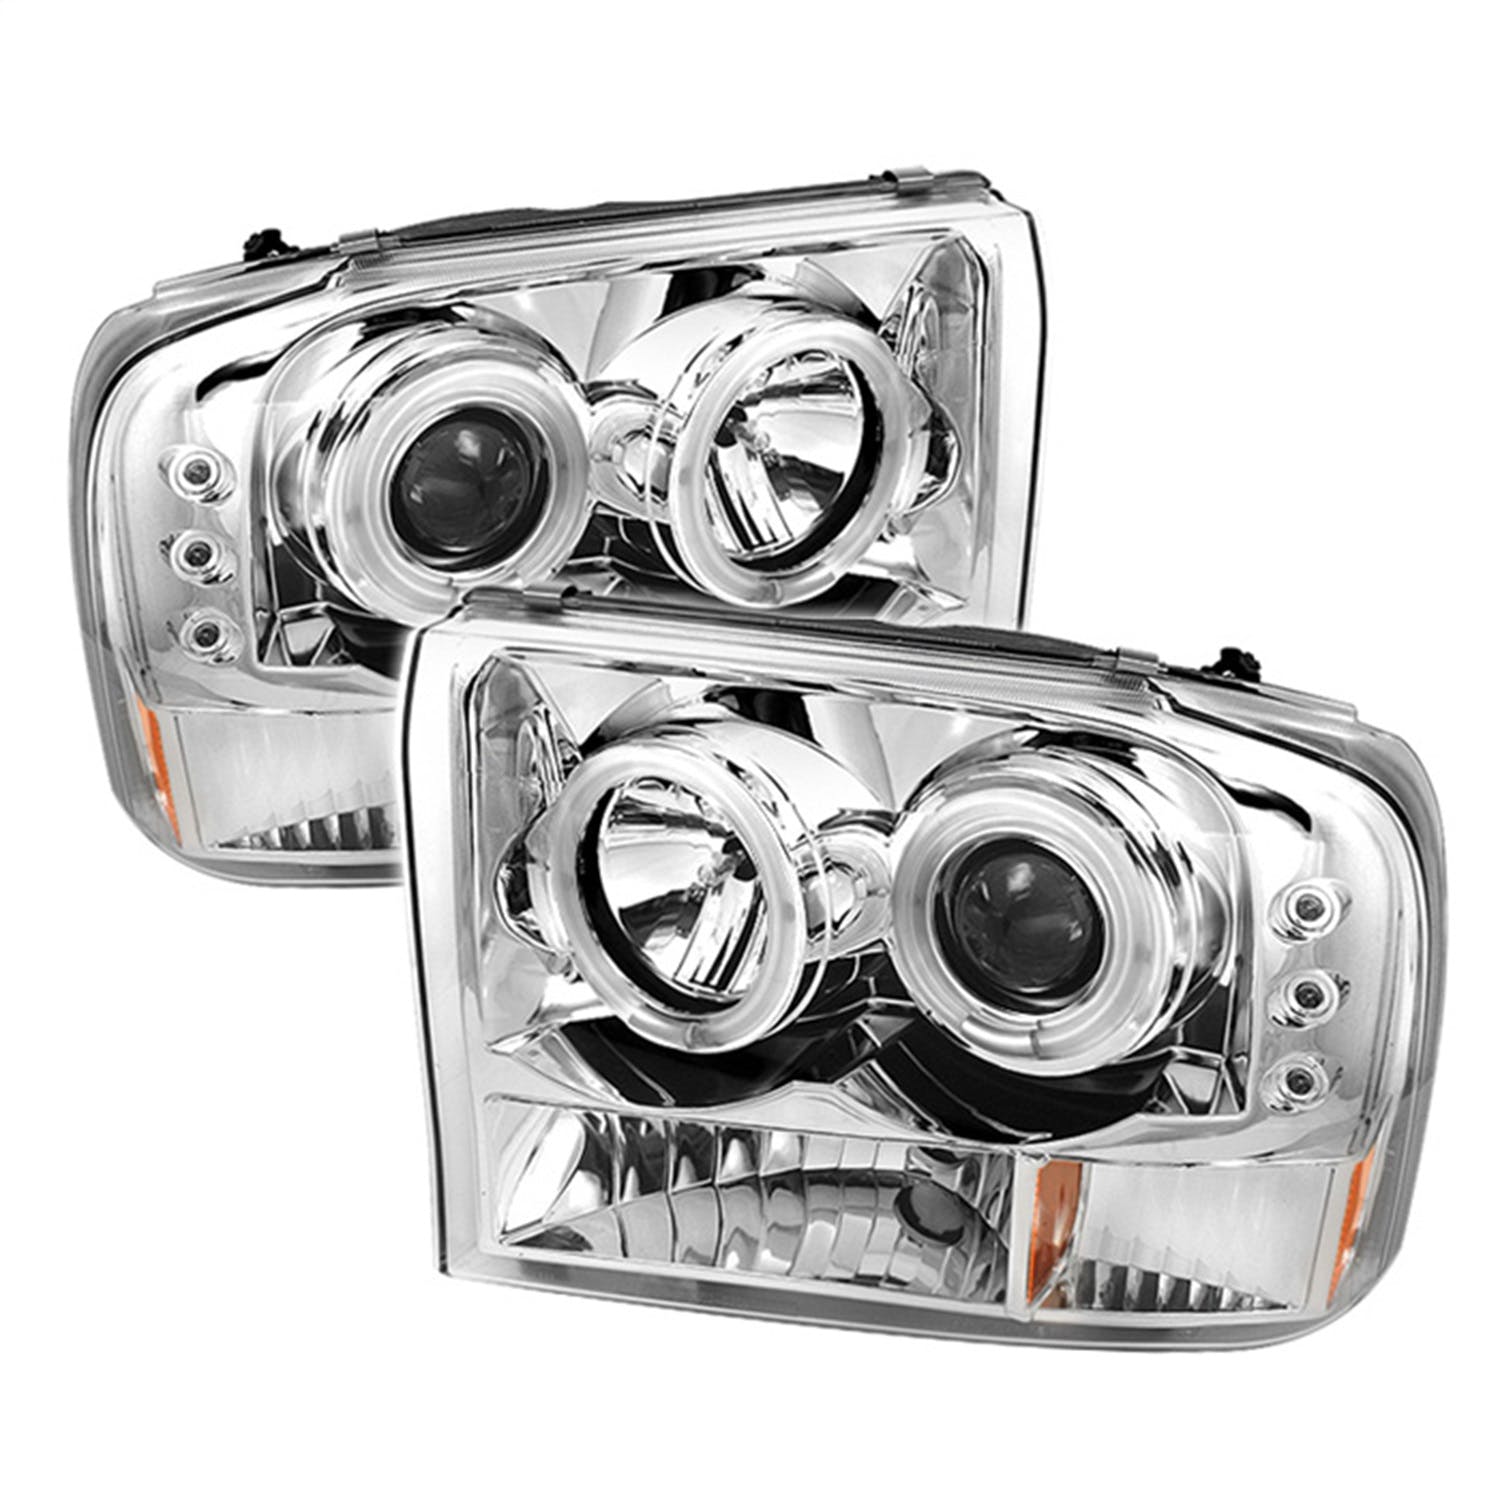 Spyder Auto 5030139 (Spyder) Ford F250 Super Duty 99-04/Ford Excursion 00-04 1PC Projector Headlight